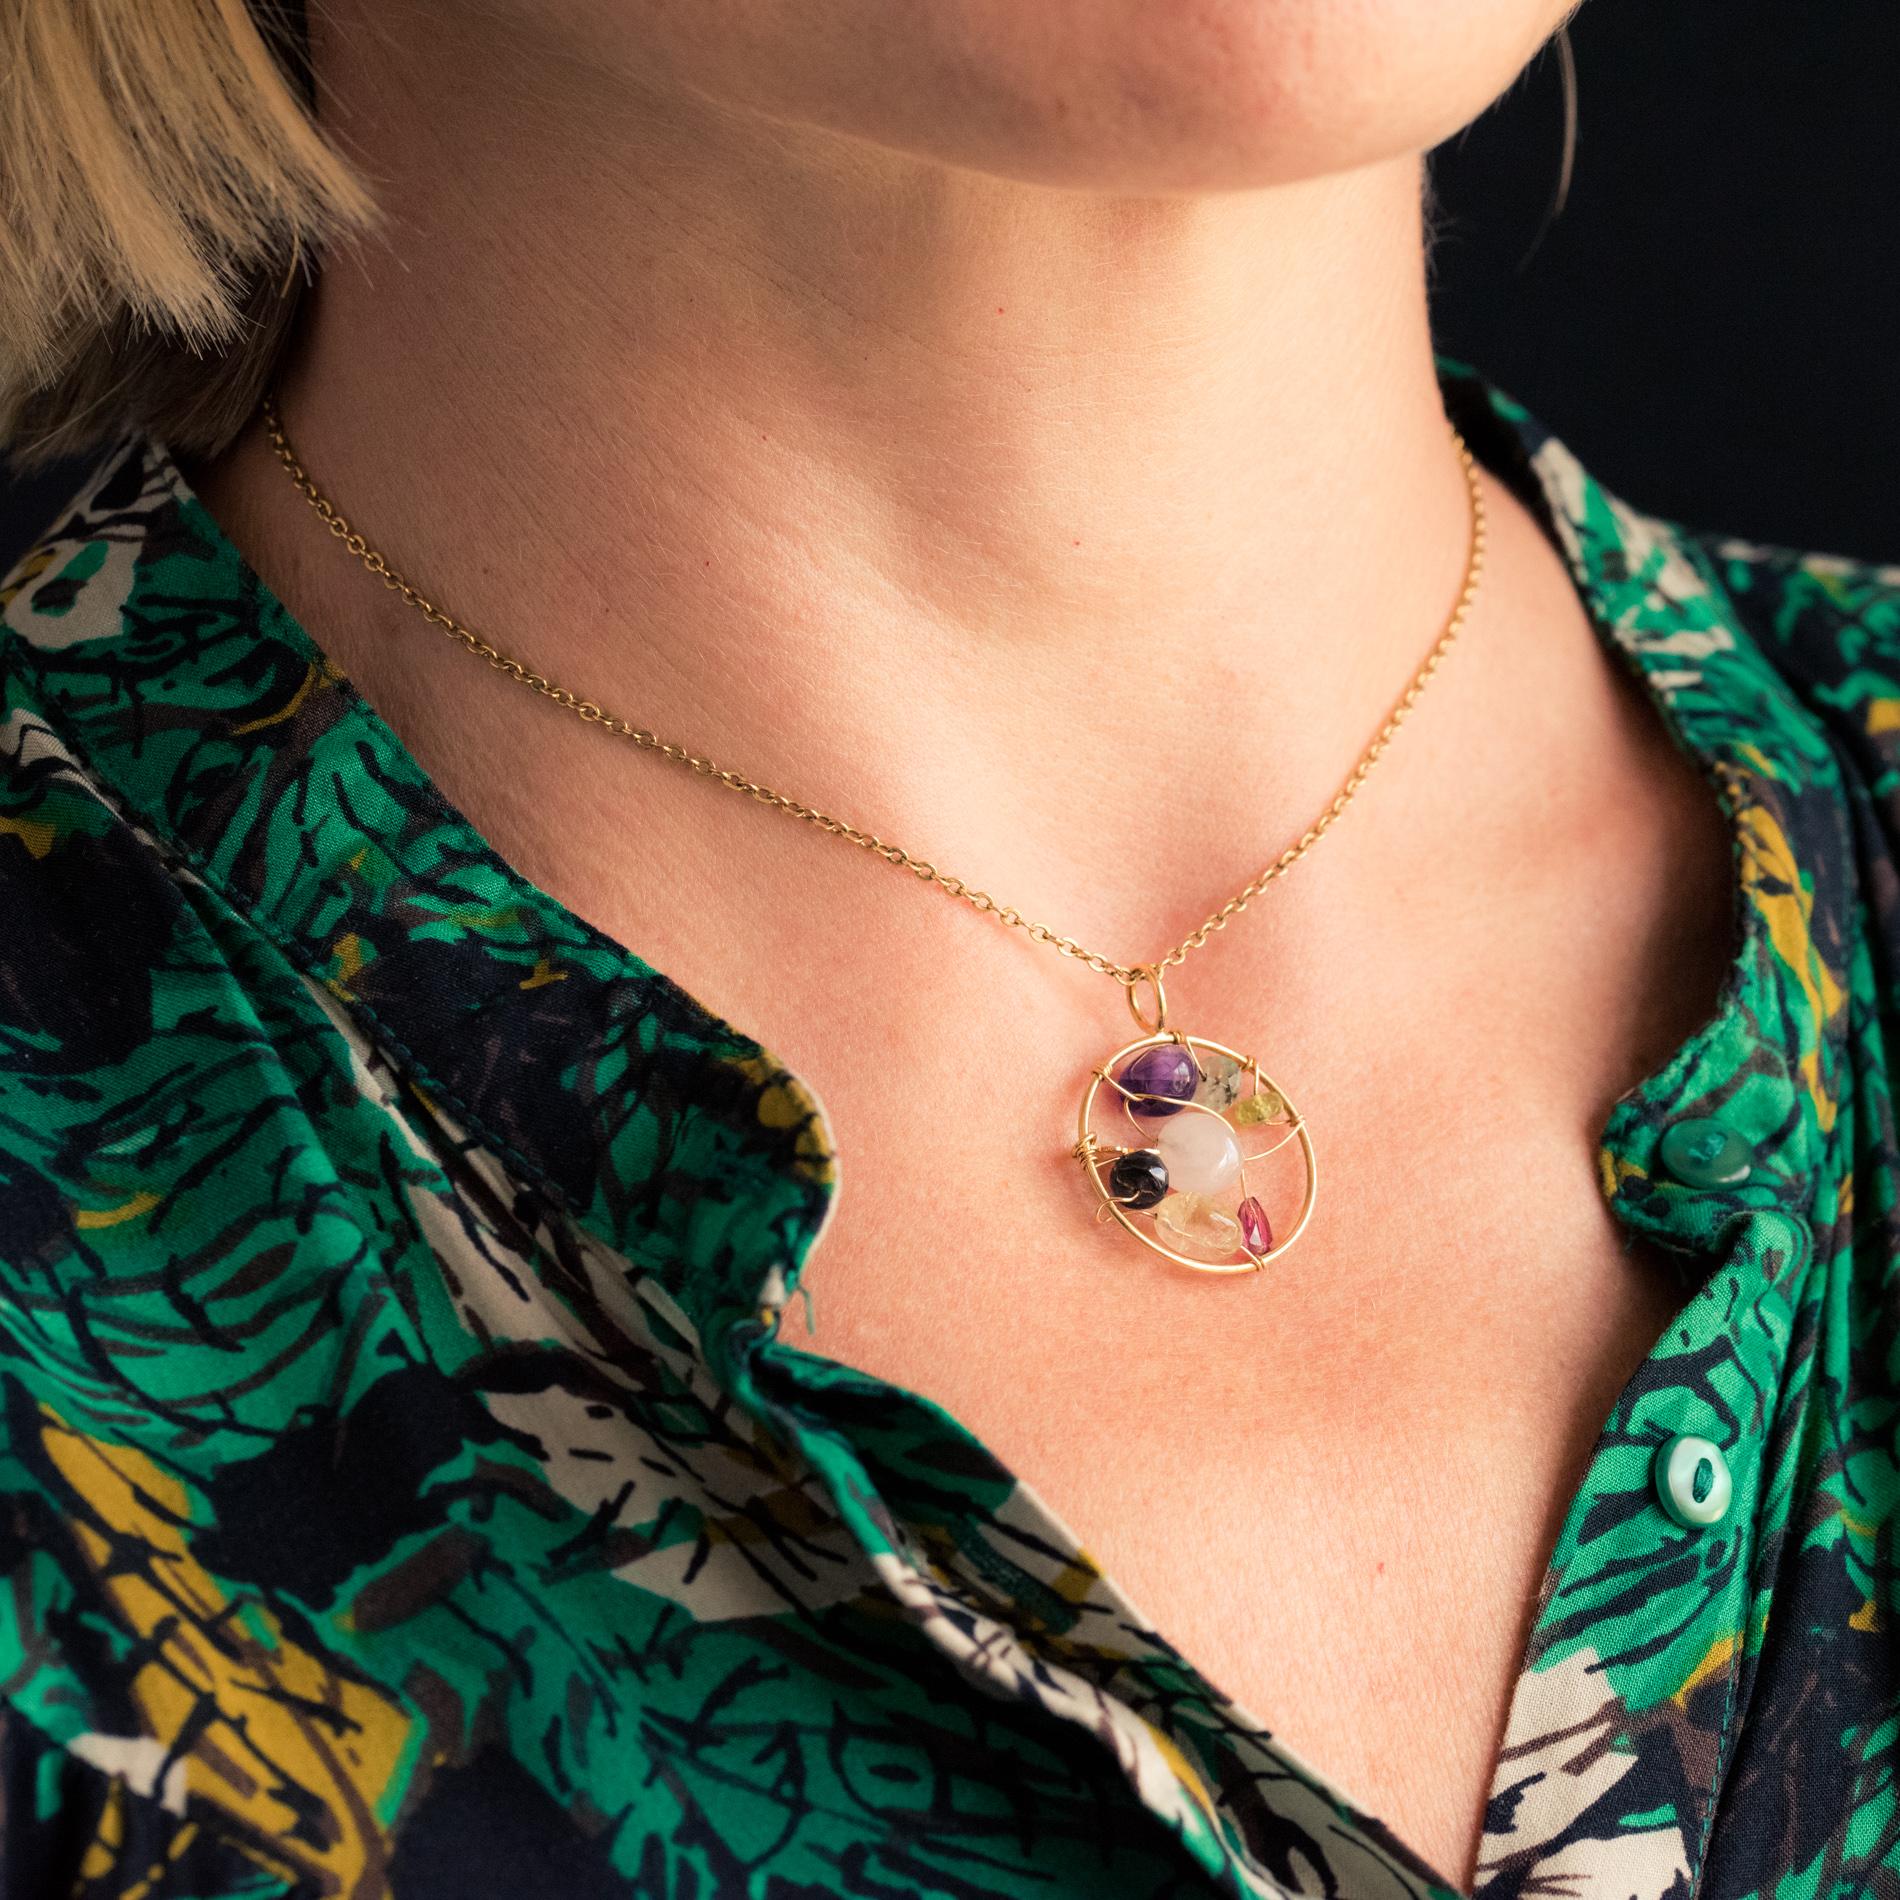 Pendant in 18 karat yellow gold.
Round shaped, this second-hand pendant from the Tous brand is formed by a gold circle within which several gemstones, whether or not cut, are fixed by gold threads running through them. A small bear symbol of the